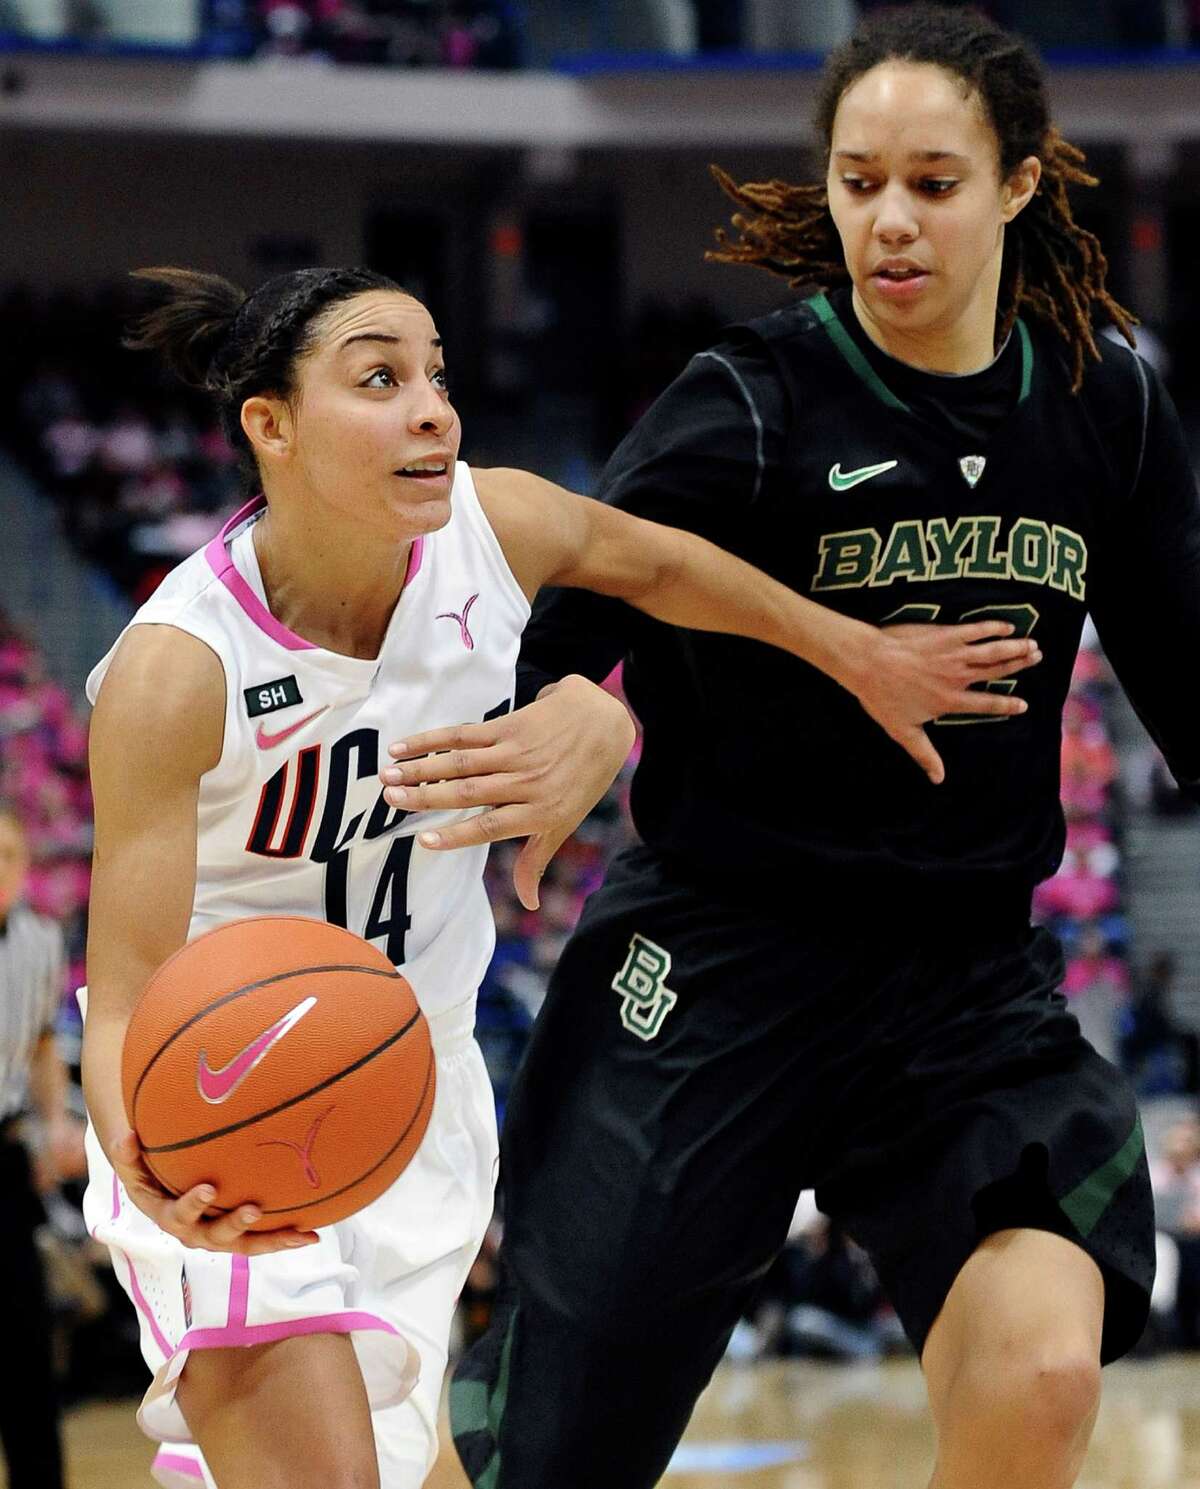 Connecticut's Bria Hartley, left, drives to the basket against Baylor's Brittney Griner during the first half of an NCAA college basketball game in Hartford, Conn., Monday, Feb. 18, 2013. (AP Photo/Jessica Hill)